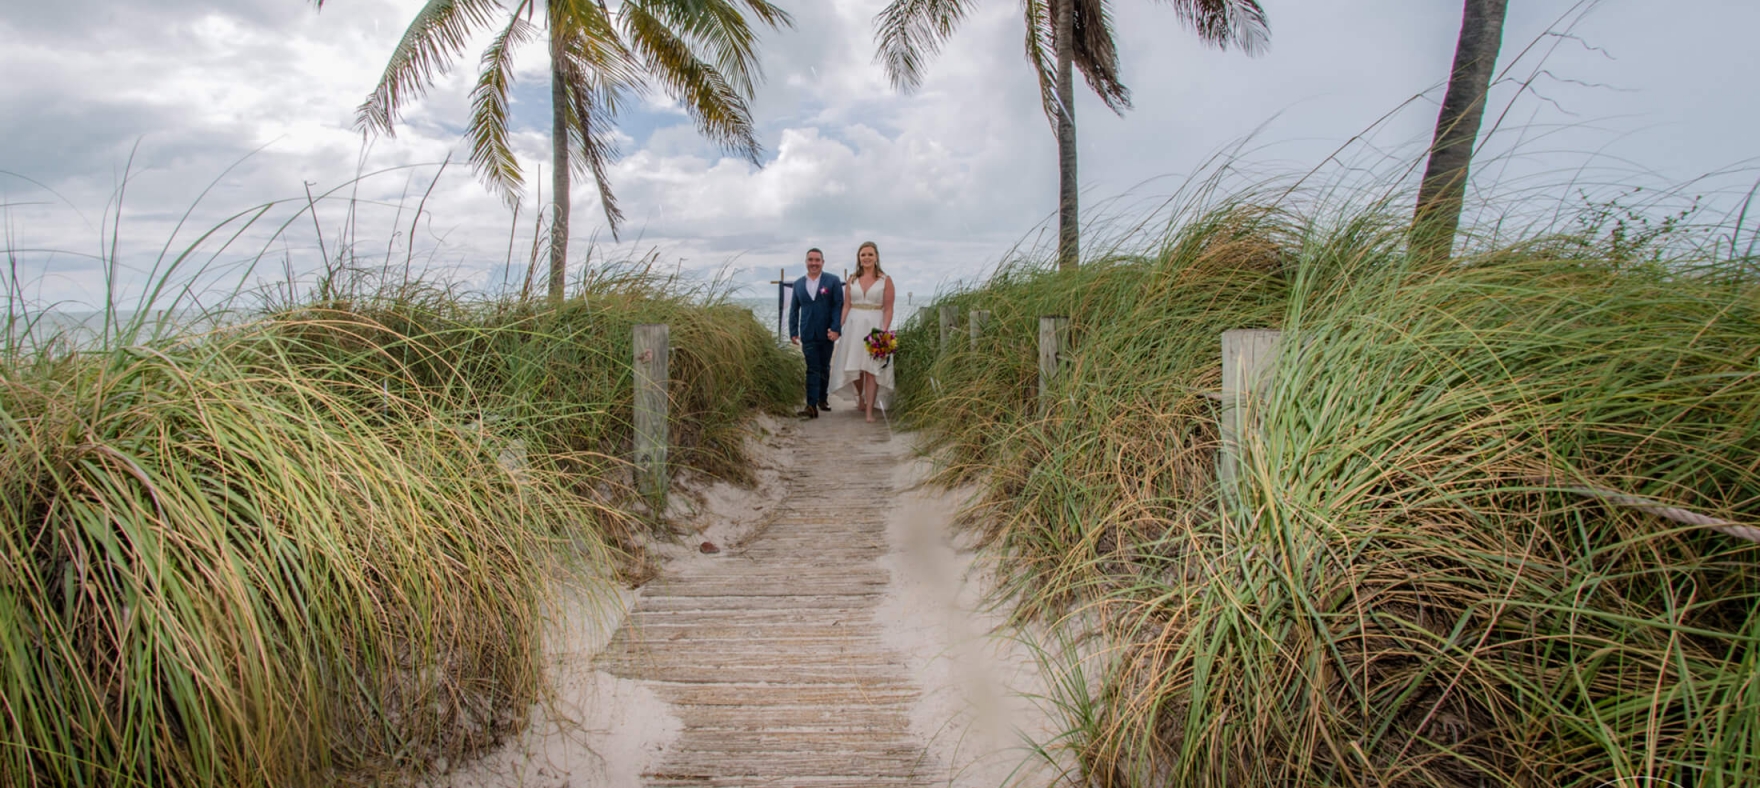 A long shot of the bride and groom standing on a pathway between lush greenery at the beach